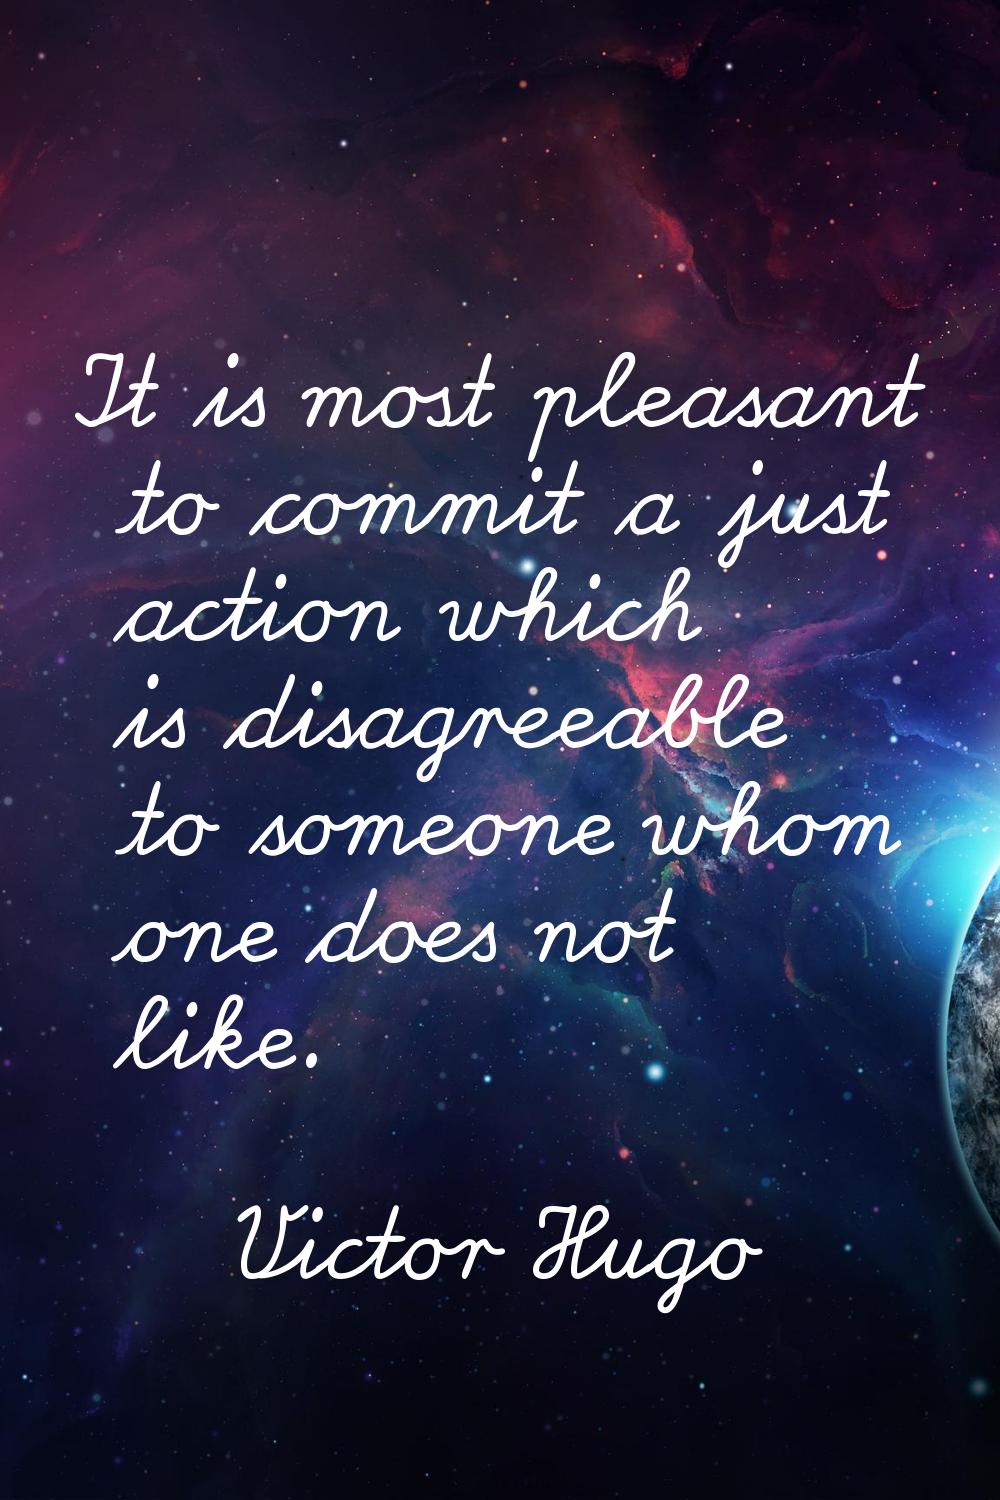 It is most pleasant to commit a just action which is disagreeable to someone whom one does not like